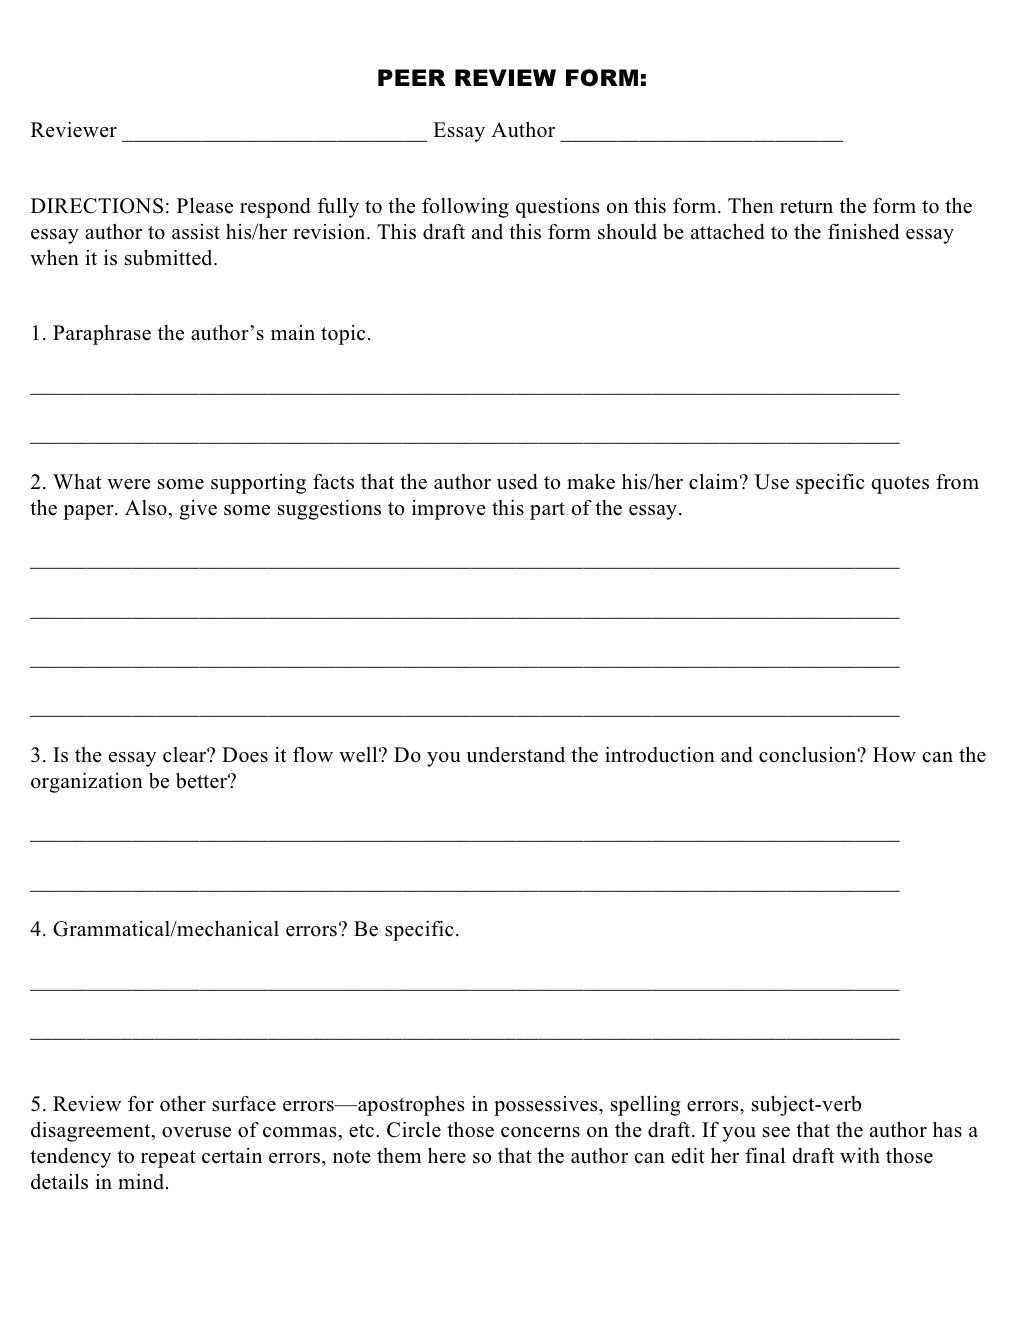 Peer Review Form Reviewer Essay Author Directions Please Respon Peer Review Essay Review Essay